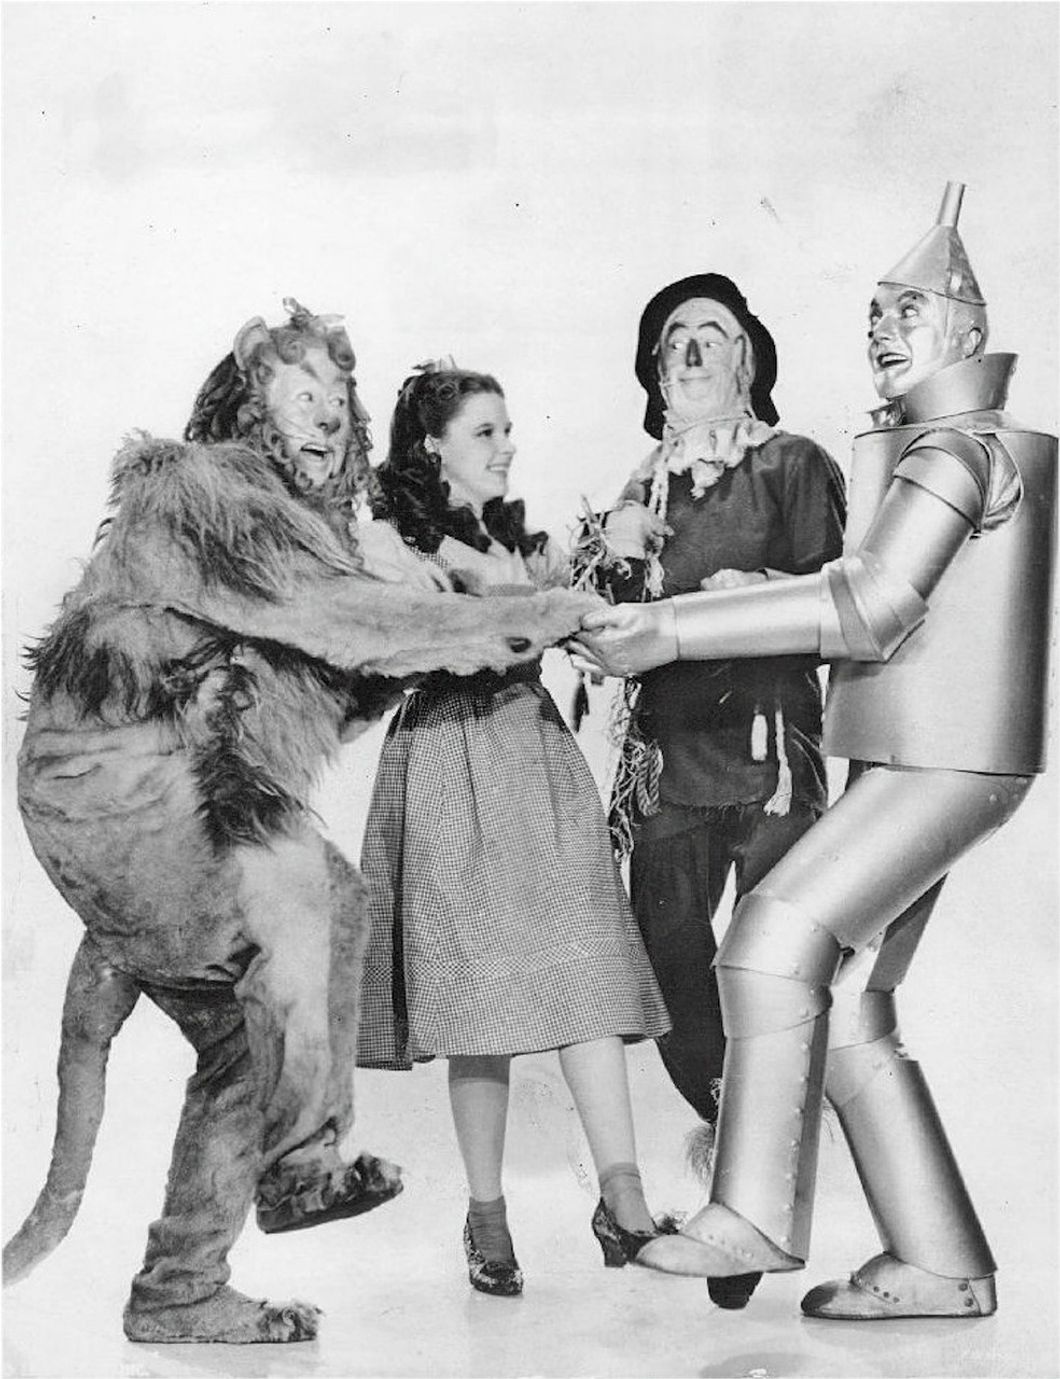 Characters from "The Wizard of Oz"